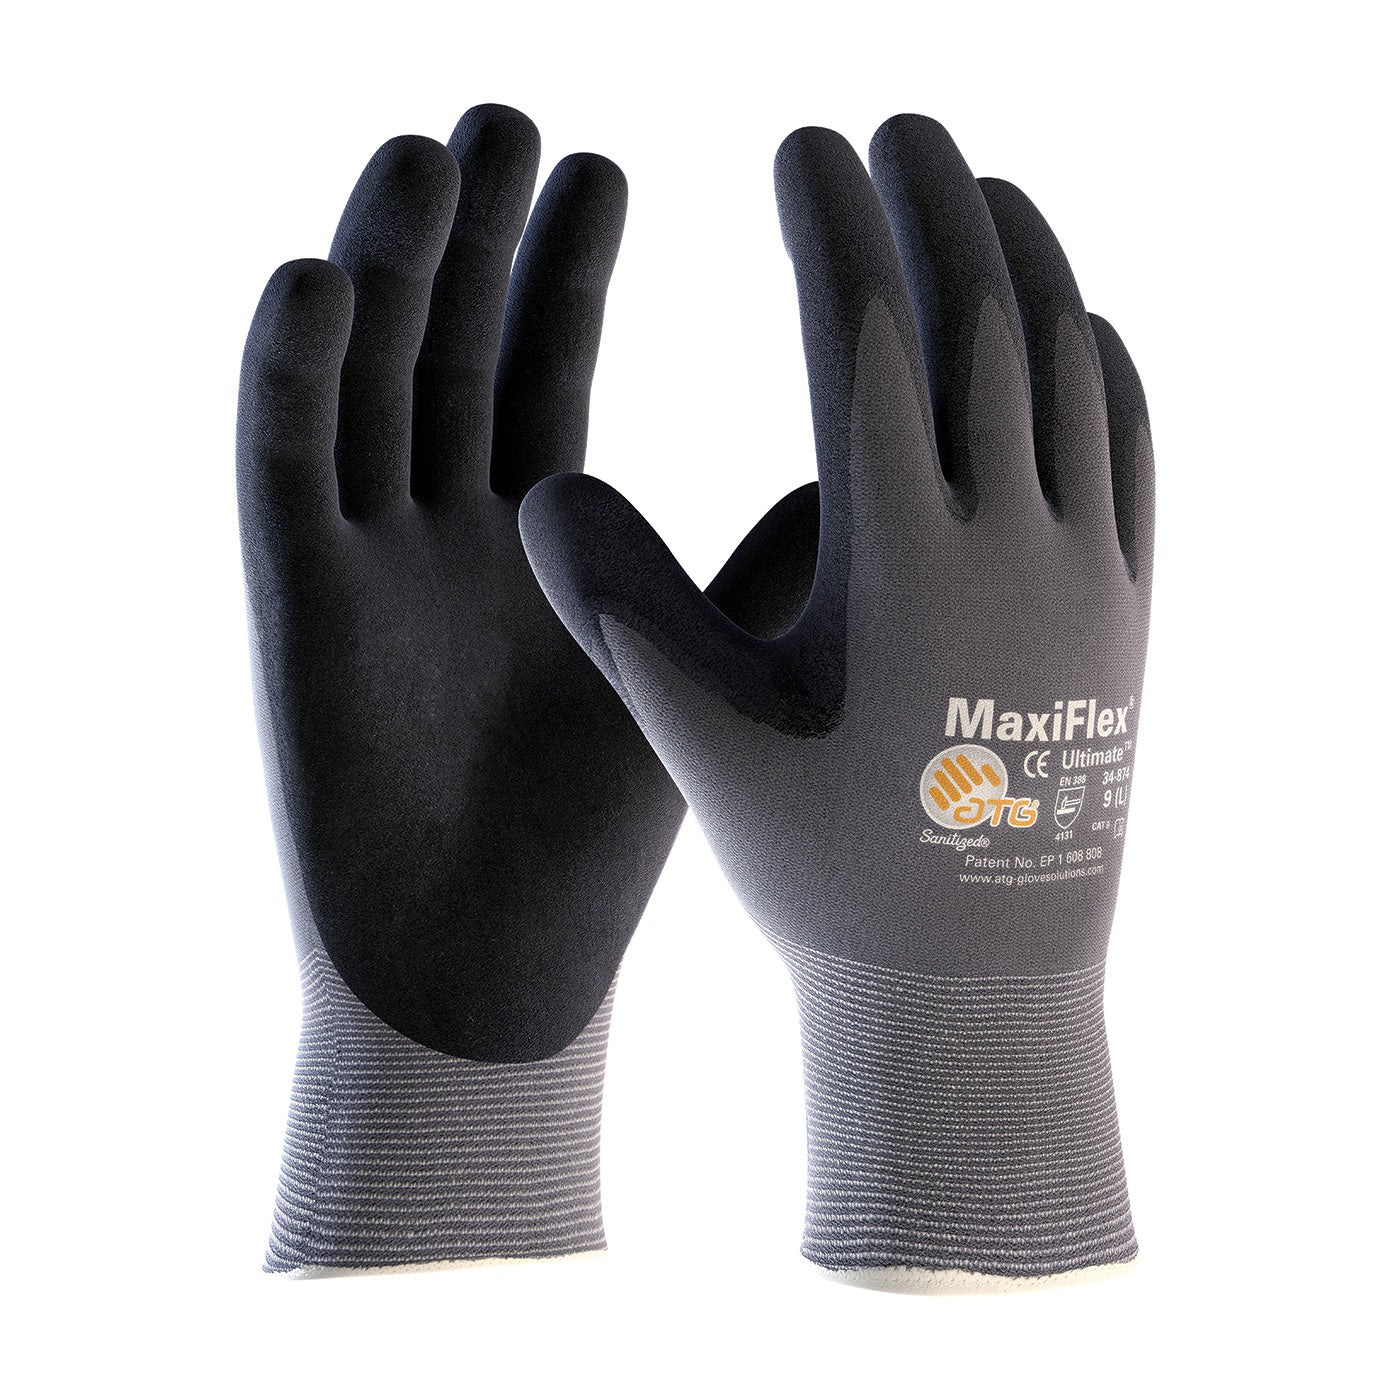 Seamless Knit Nylon / Elastane Glove with Nitrile Coated MicroFoam Grip on Palm & Fingers - Touchscreen Compatible-eSafety Supplies, Inc